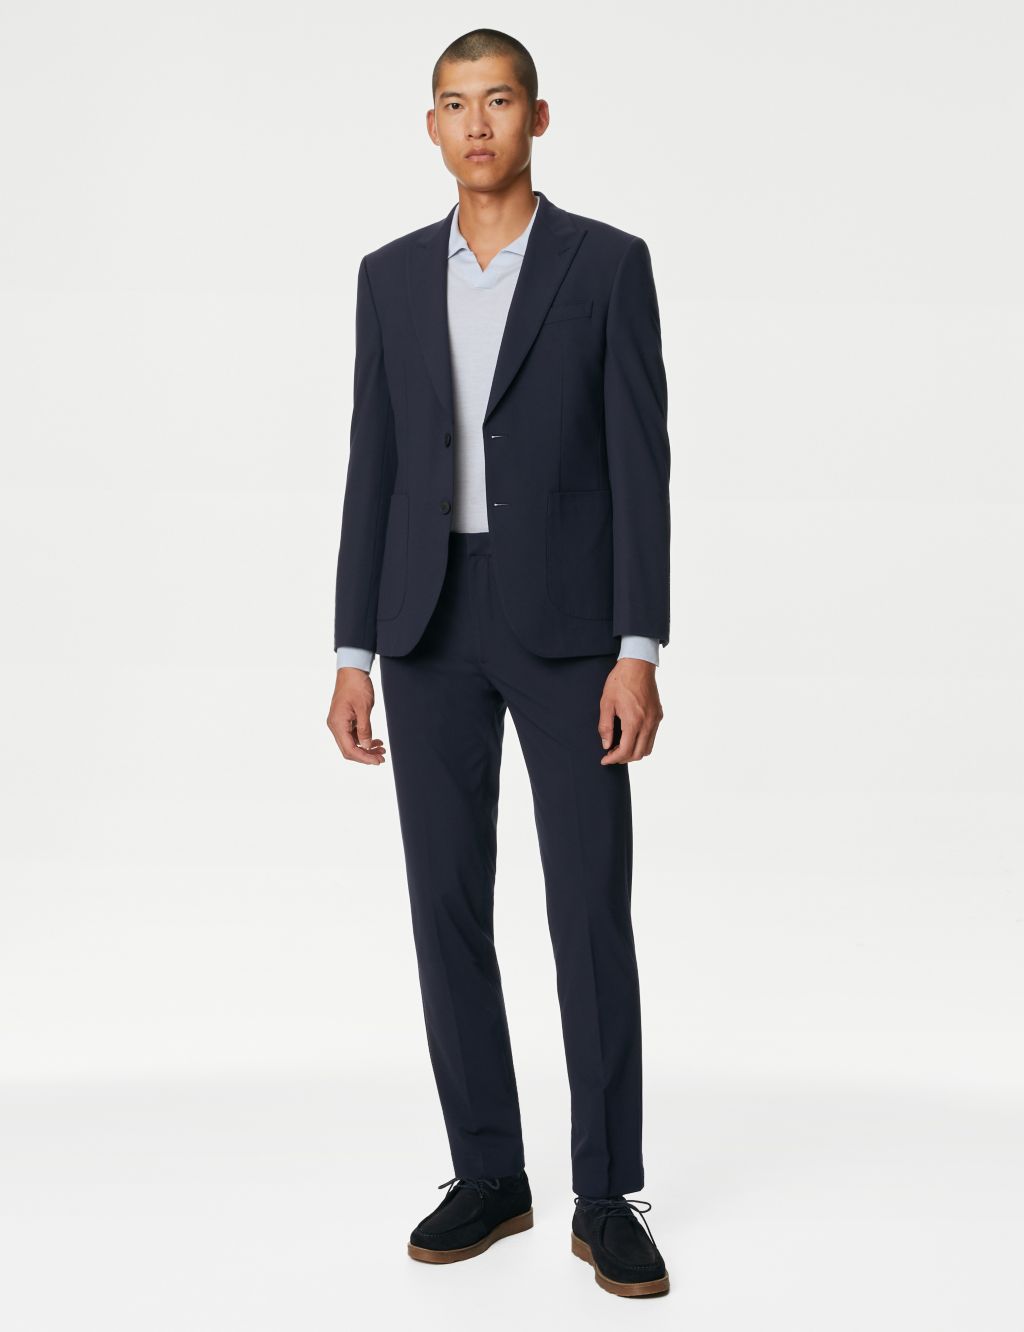 Shop Tailored Fit Smart Trousers at M&S